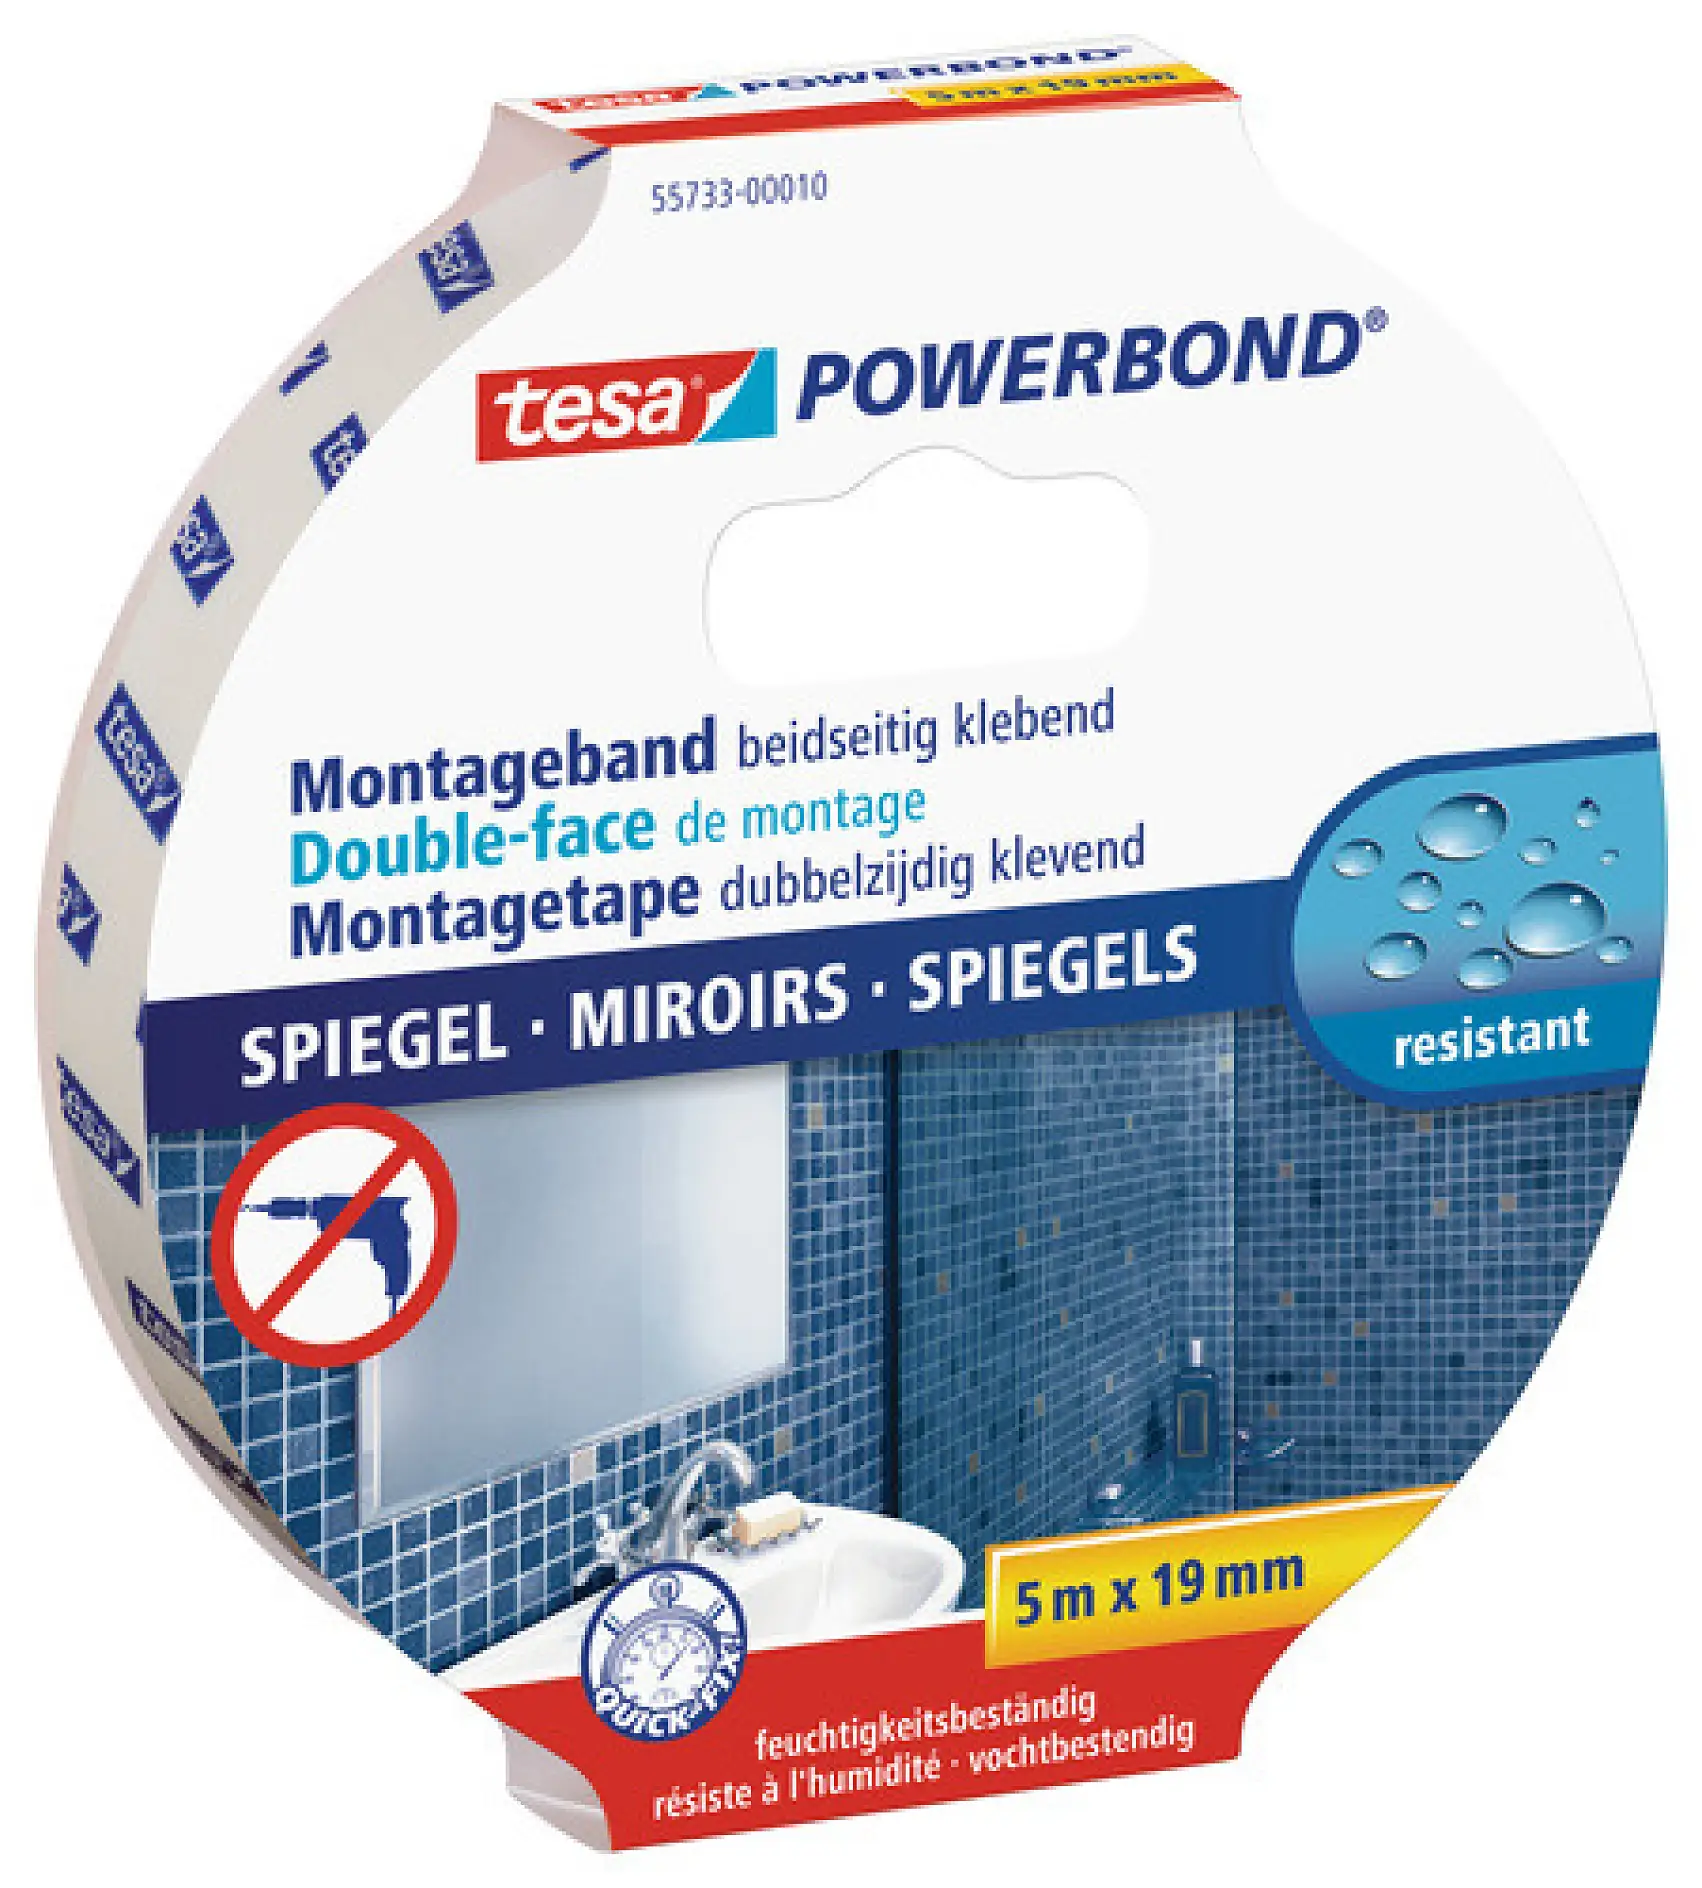 tesa® Powerbond MIRROR is the ideal strong mounting tape for hanging mirrors and other flat objects. This double-sided self-adhesive mounting tape offers superior bonding power even in humid surroundings, such as bathrooms. It can hold mirrors of up to 70x70 cm and a thickness of up to 4 mm. You can forget about nails or screws. This unique mounting tape will securely attach your bathroom or wall mirrors without damaging valuable tiles.